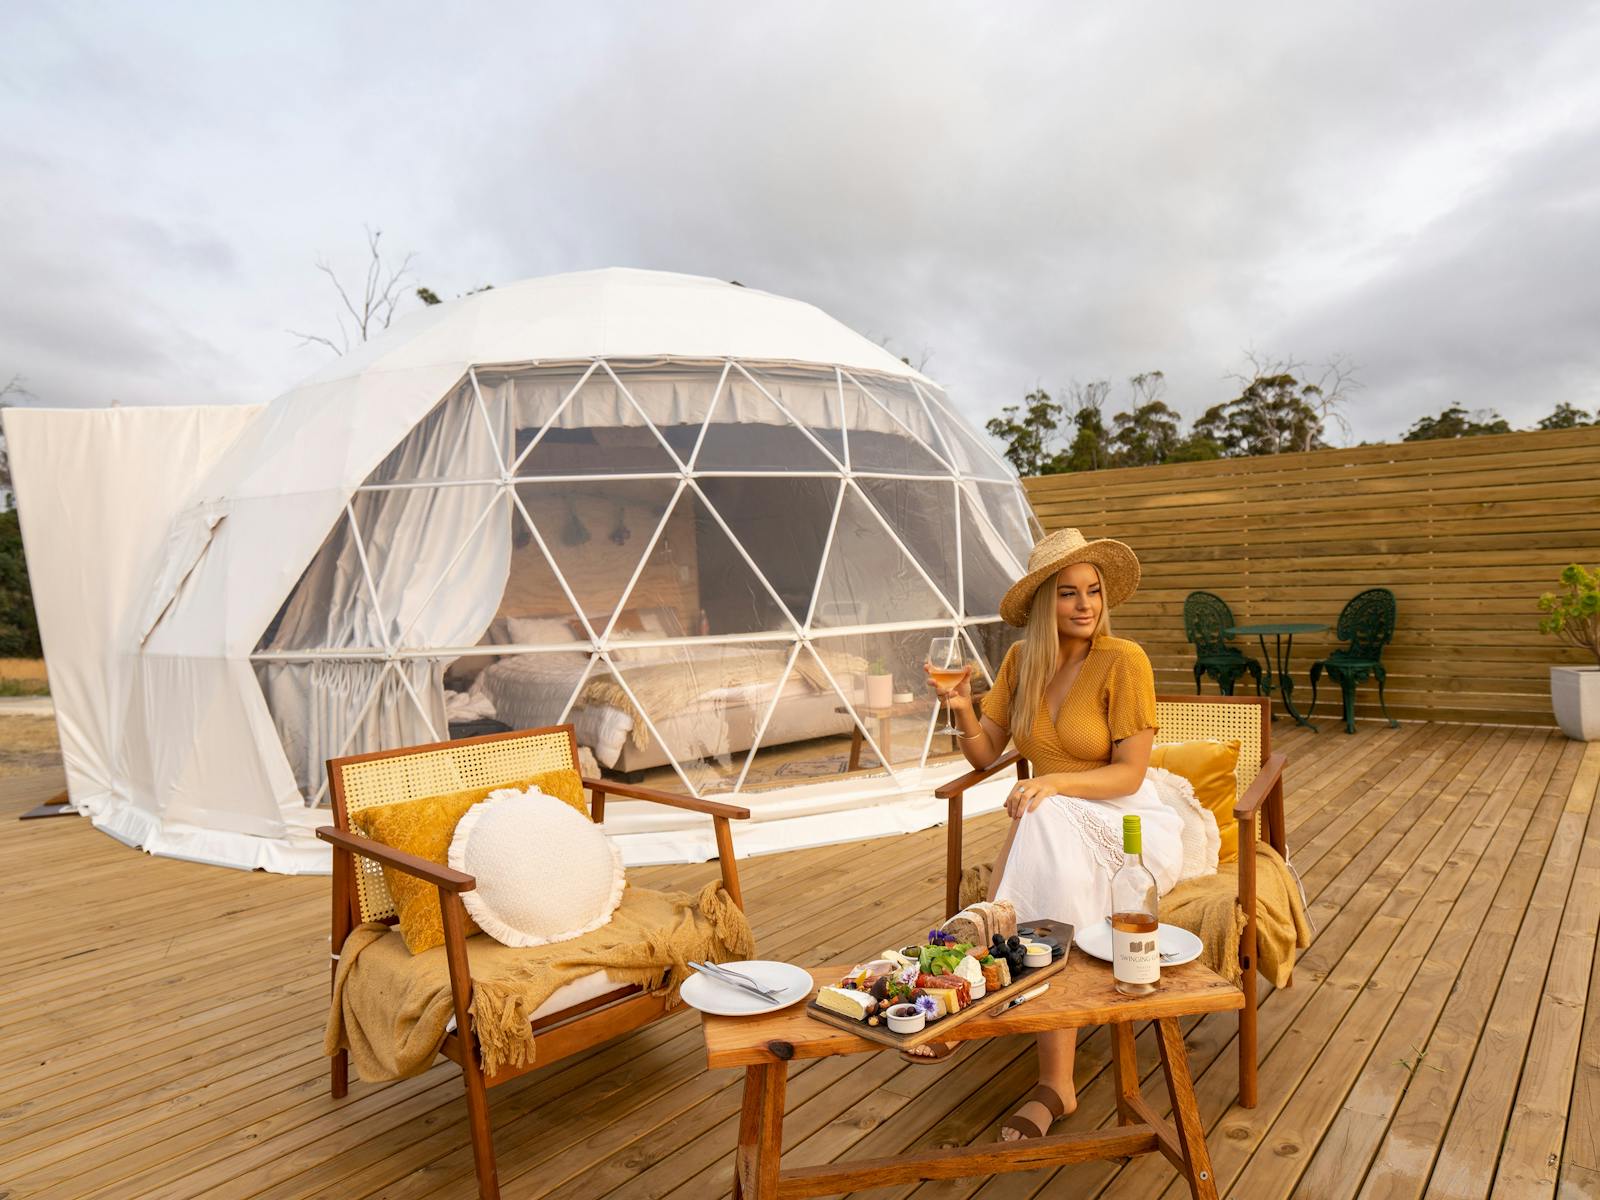 Glamping in style and a glass of wine